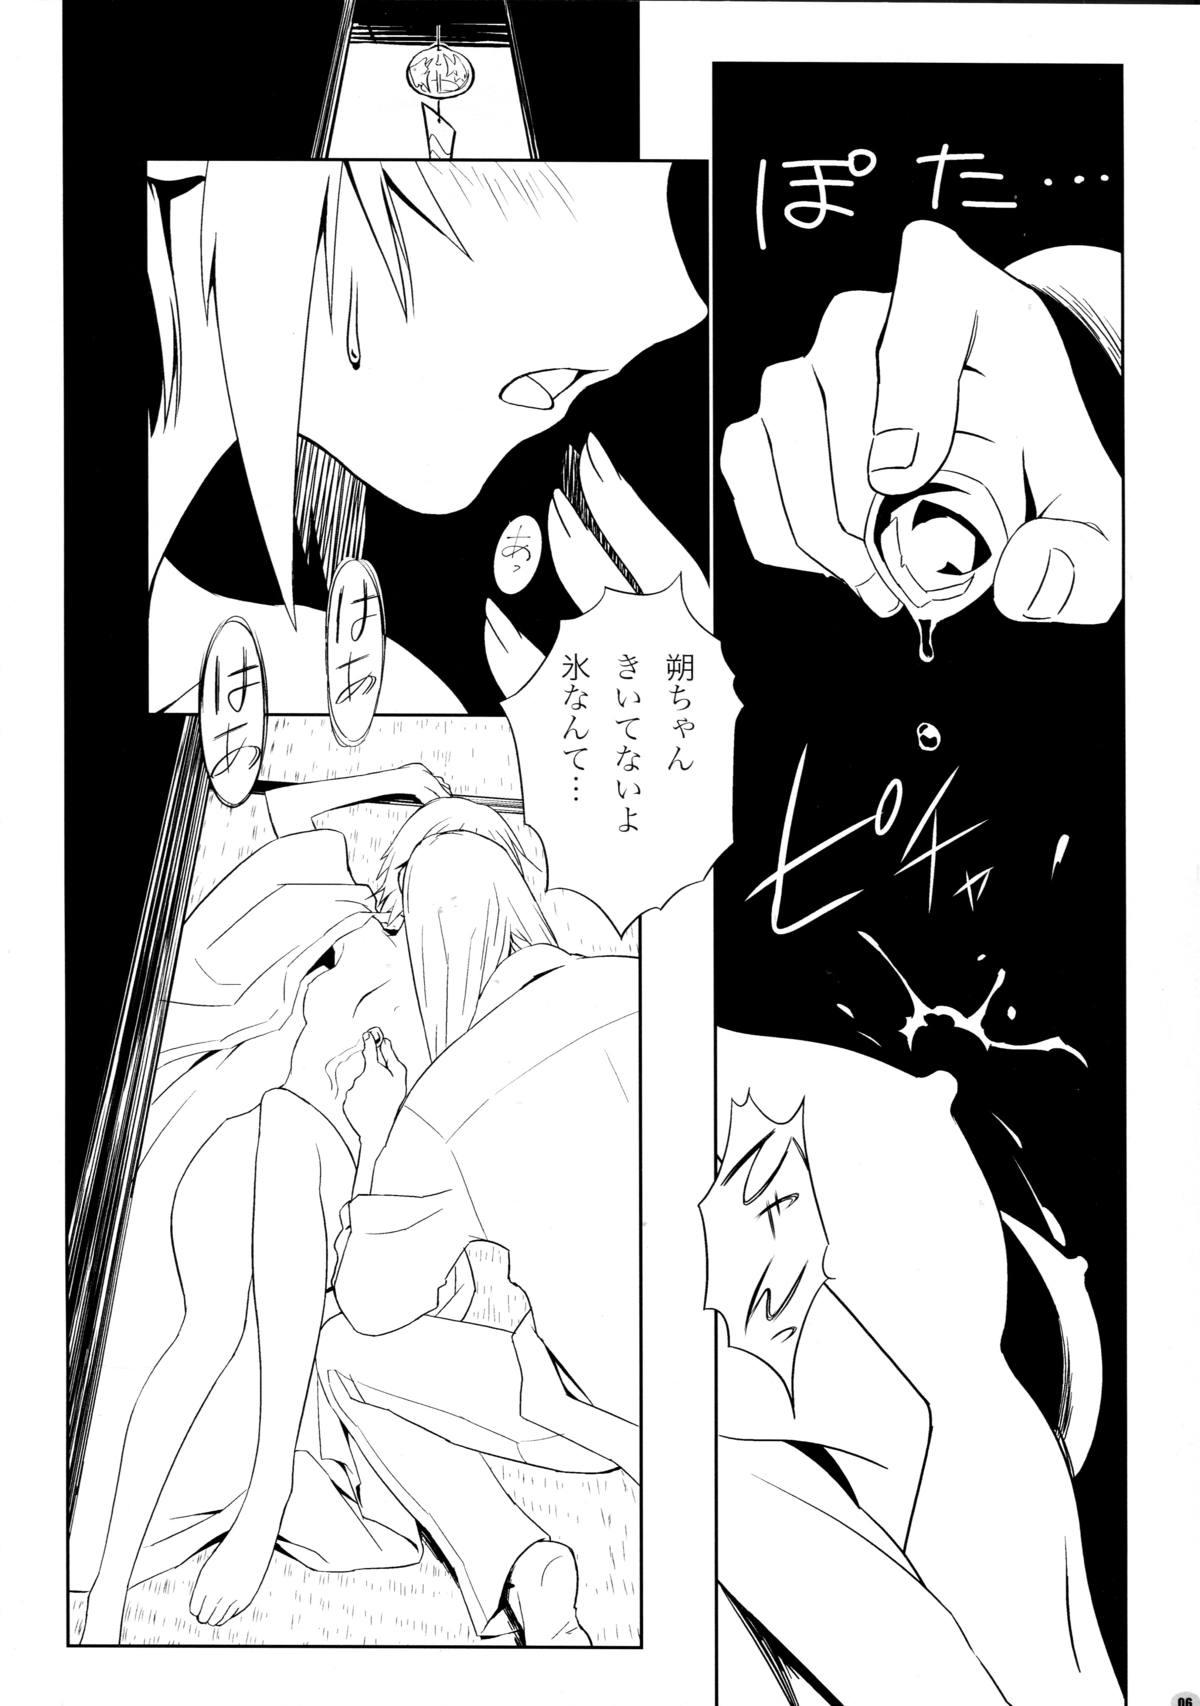 Foreplay After Chidaruma TYPE-01 Couple Sex - Page 6